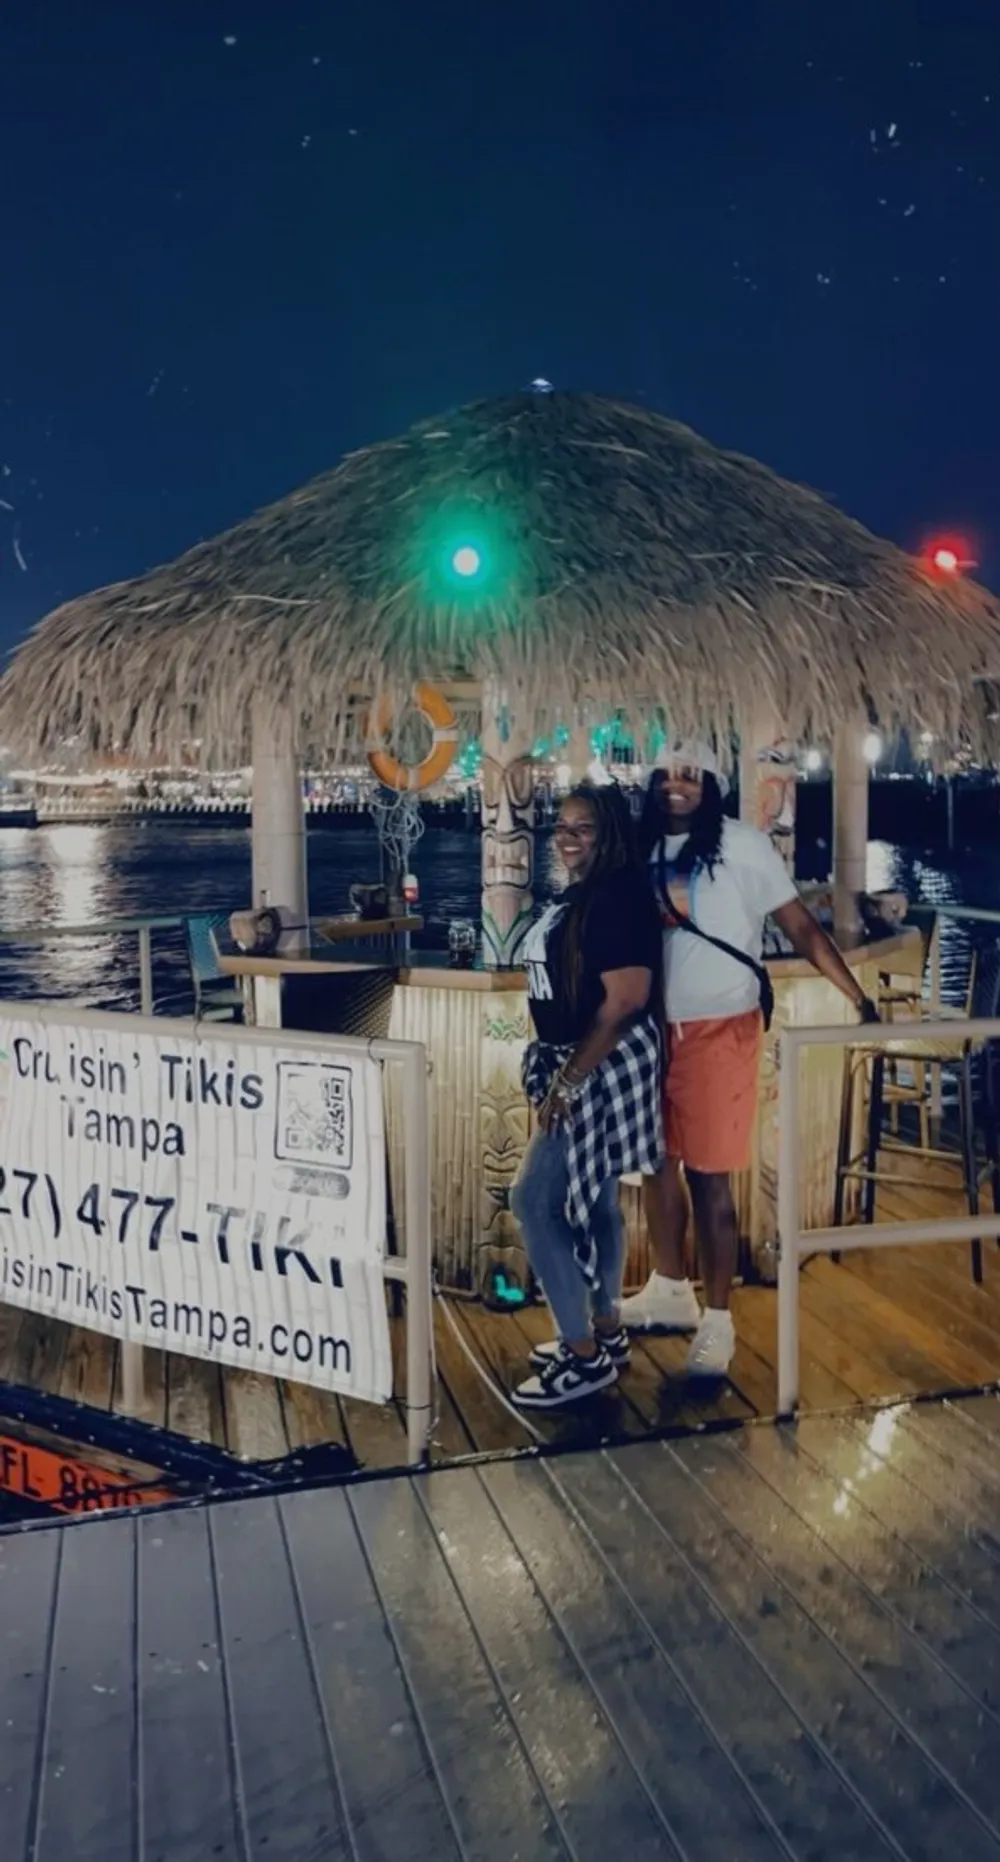 Two people are posing with smiles on a dock next to a thatched-roof structure adorned with festive lights at night giving off a cheerful tropical vibe